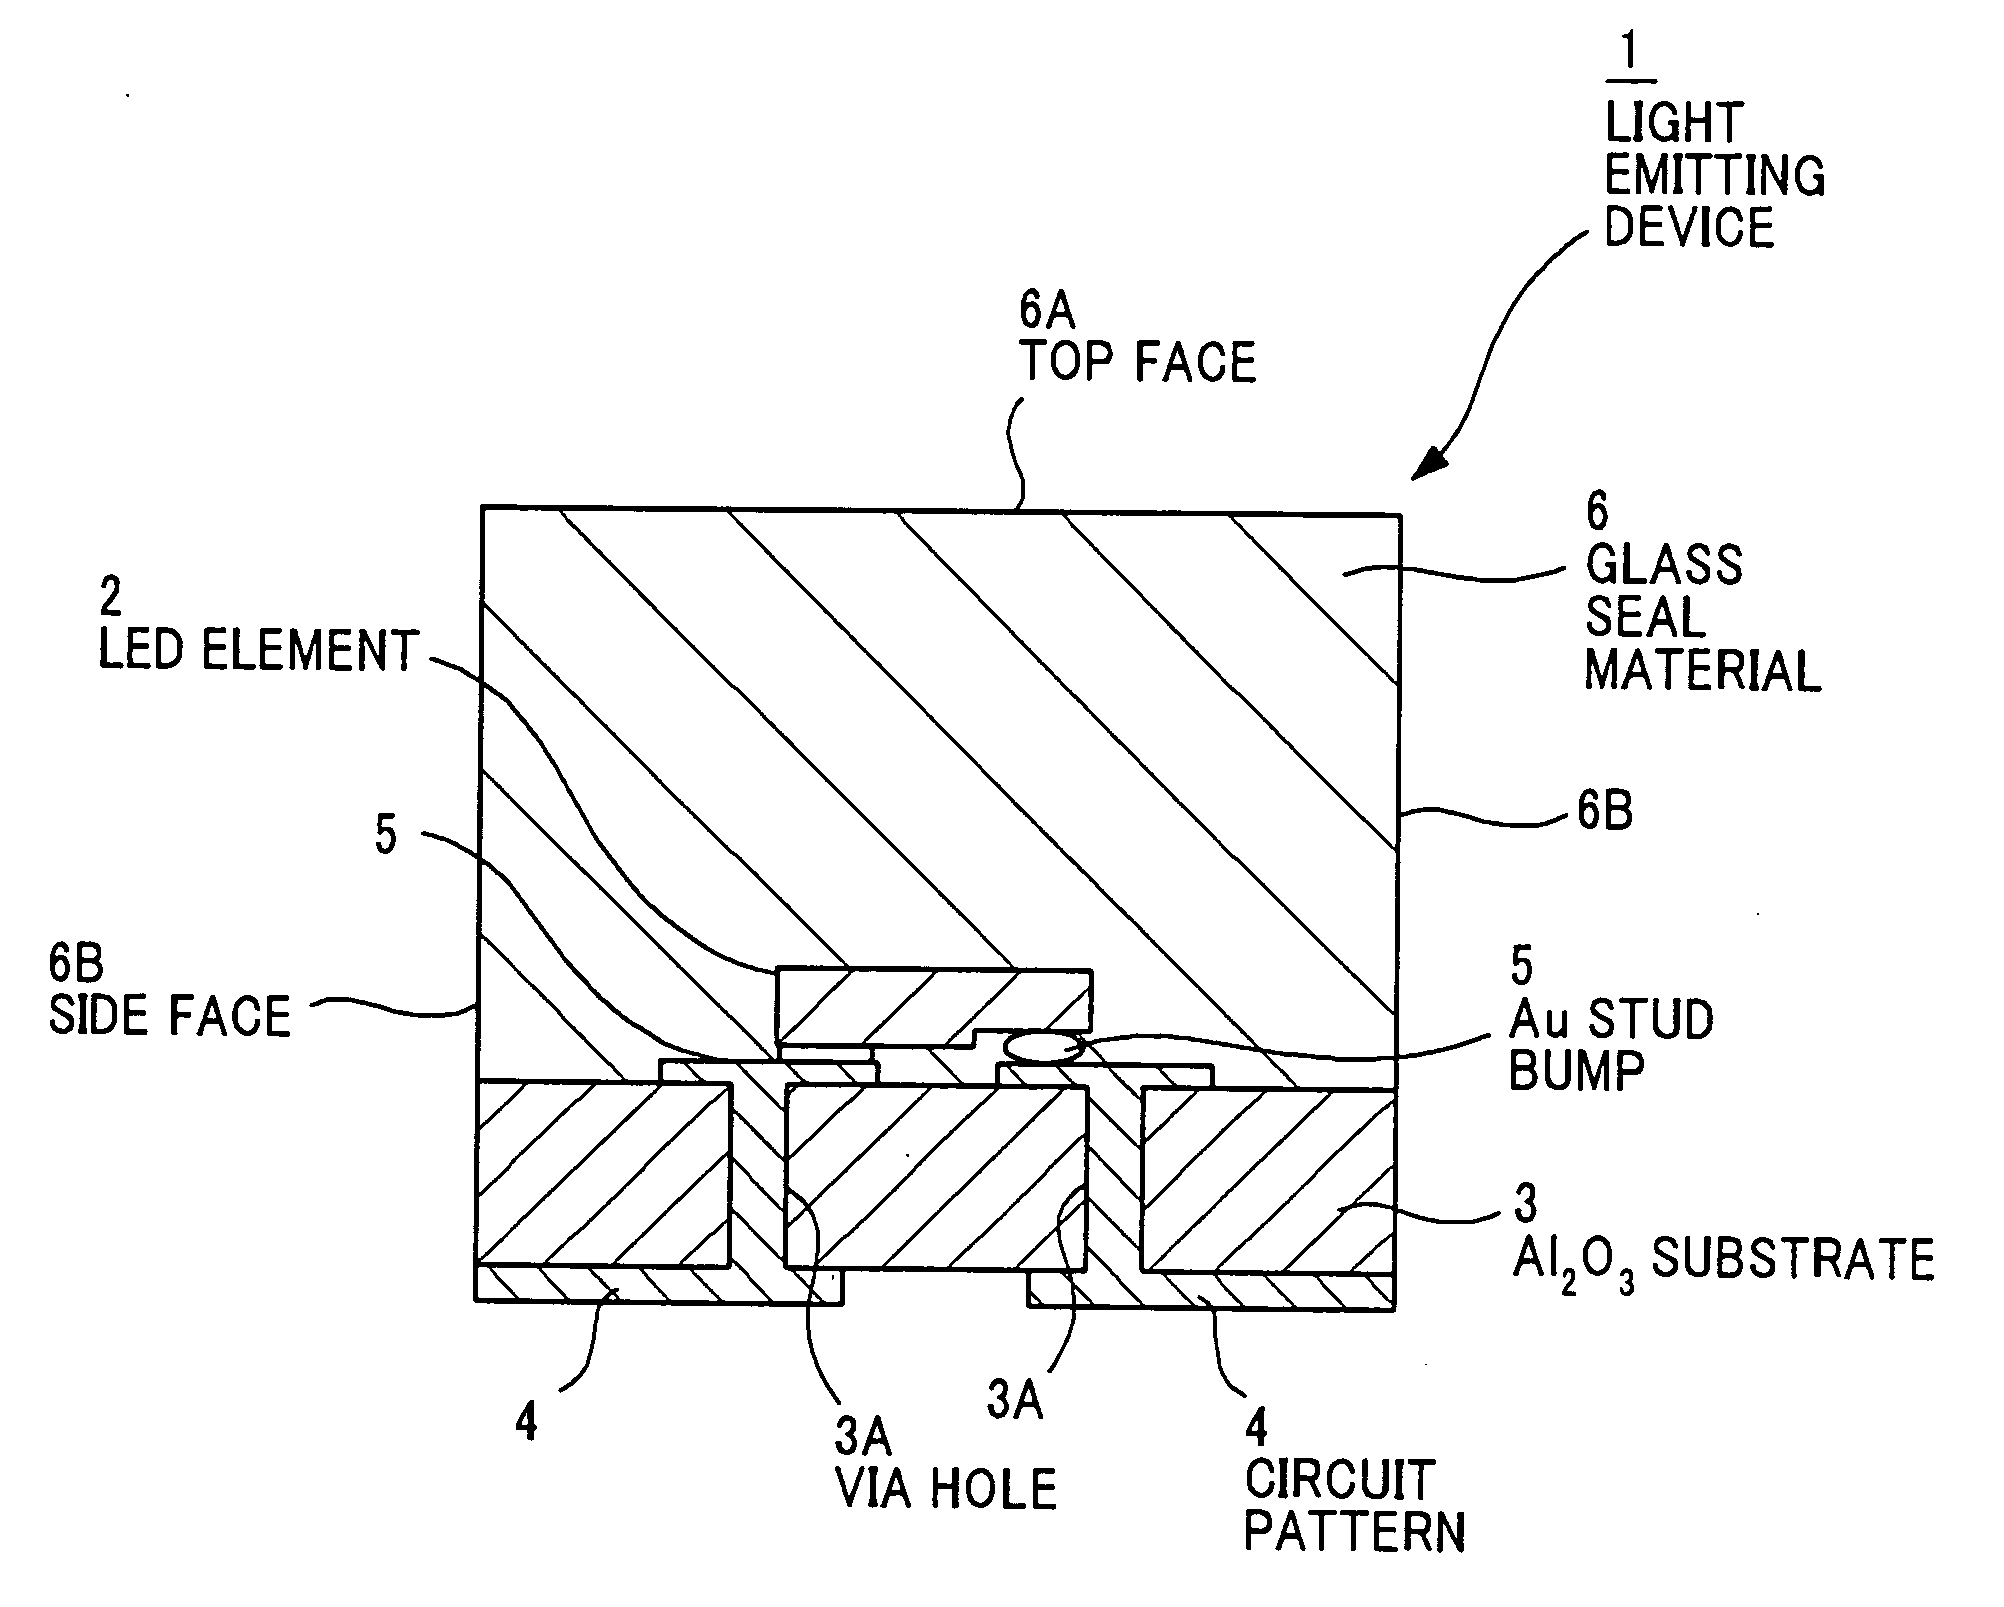 Solid-state element and solid-state element device